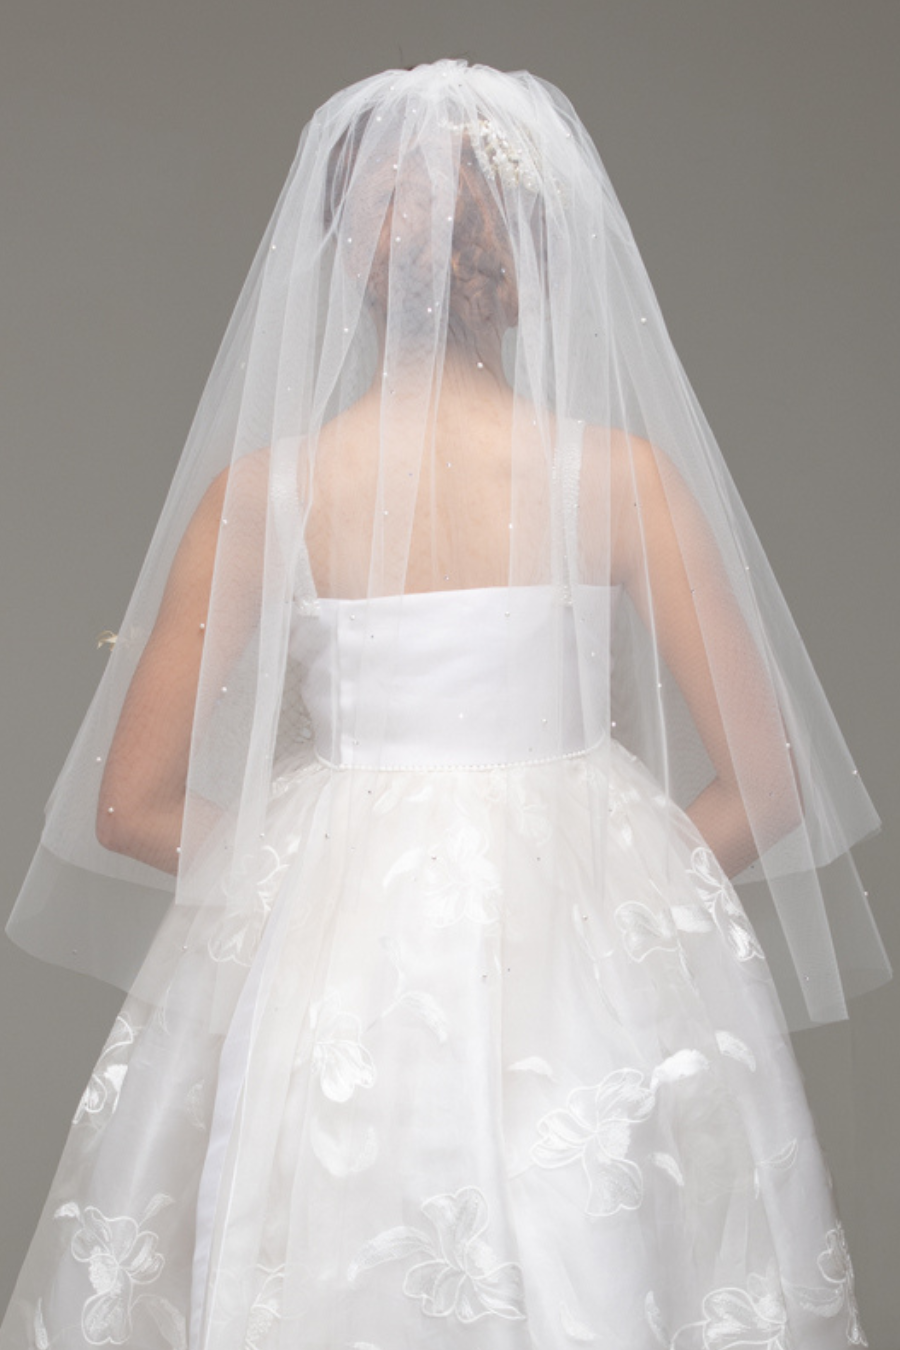 Veil with Pearl Accents